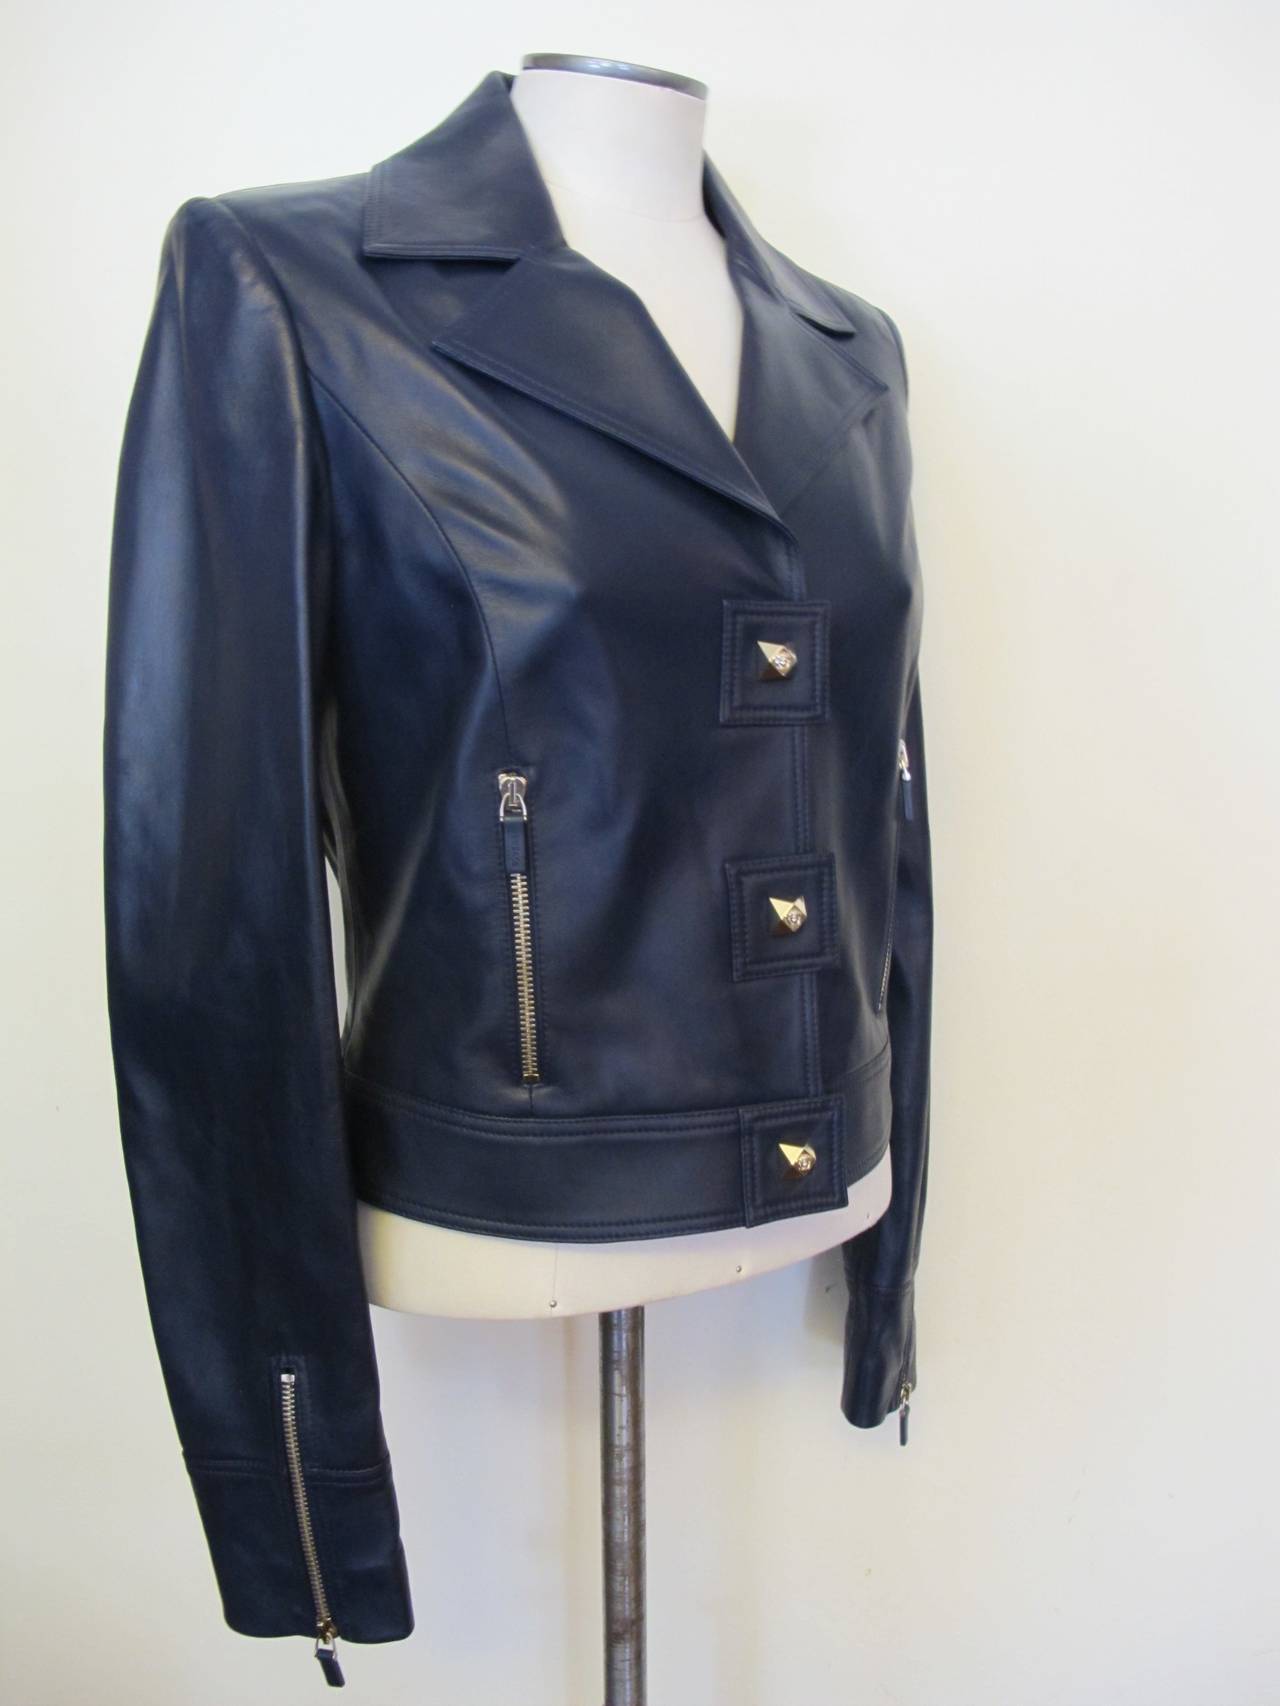 This is an exquisite navy leather jacket. It has two - five inch zipper pockets in front of jacket and two matching 5 inch zippers which open sleeves. The Jack is lined with iconic 100% silk Versace lining. The lambskin is very soft.

Shoulder to